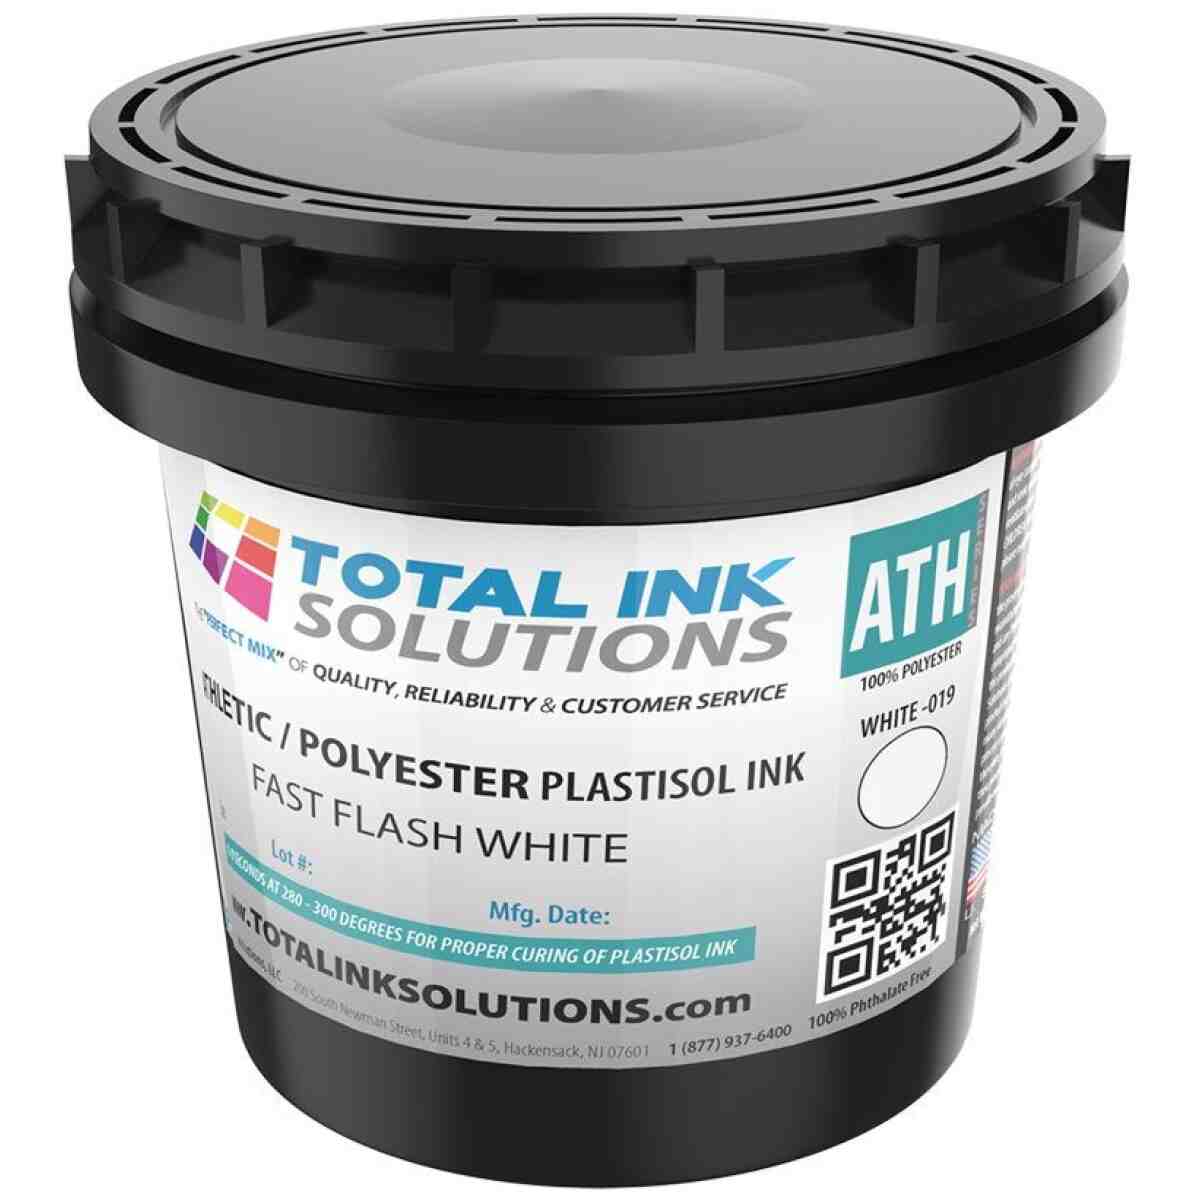 Fast Flash Athletic 100% Polyester Plastisol Ink - White - Pint TOTAL INK SOLUTIONS®